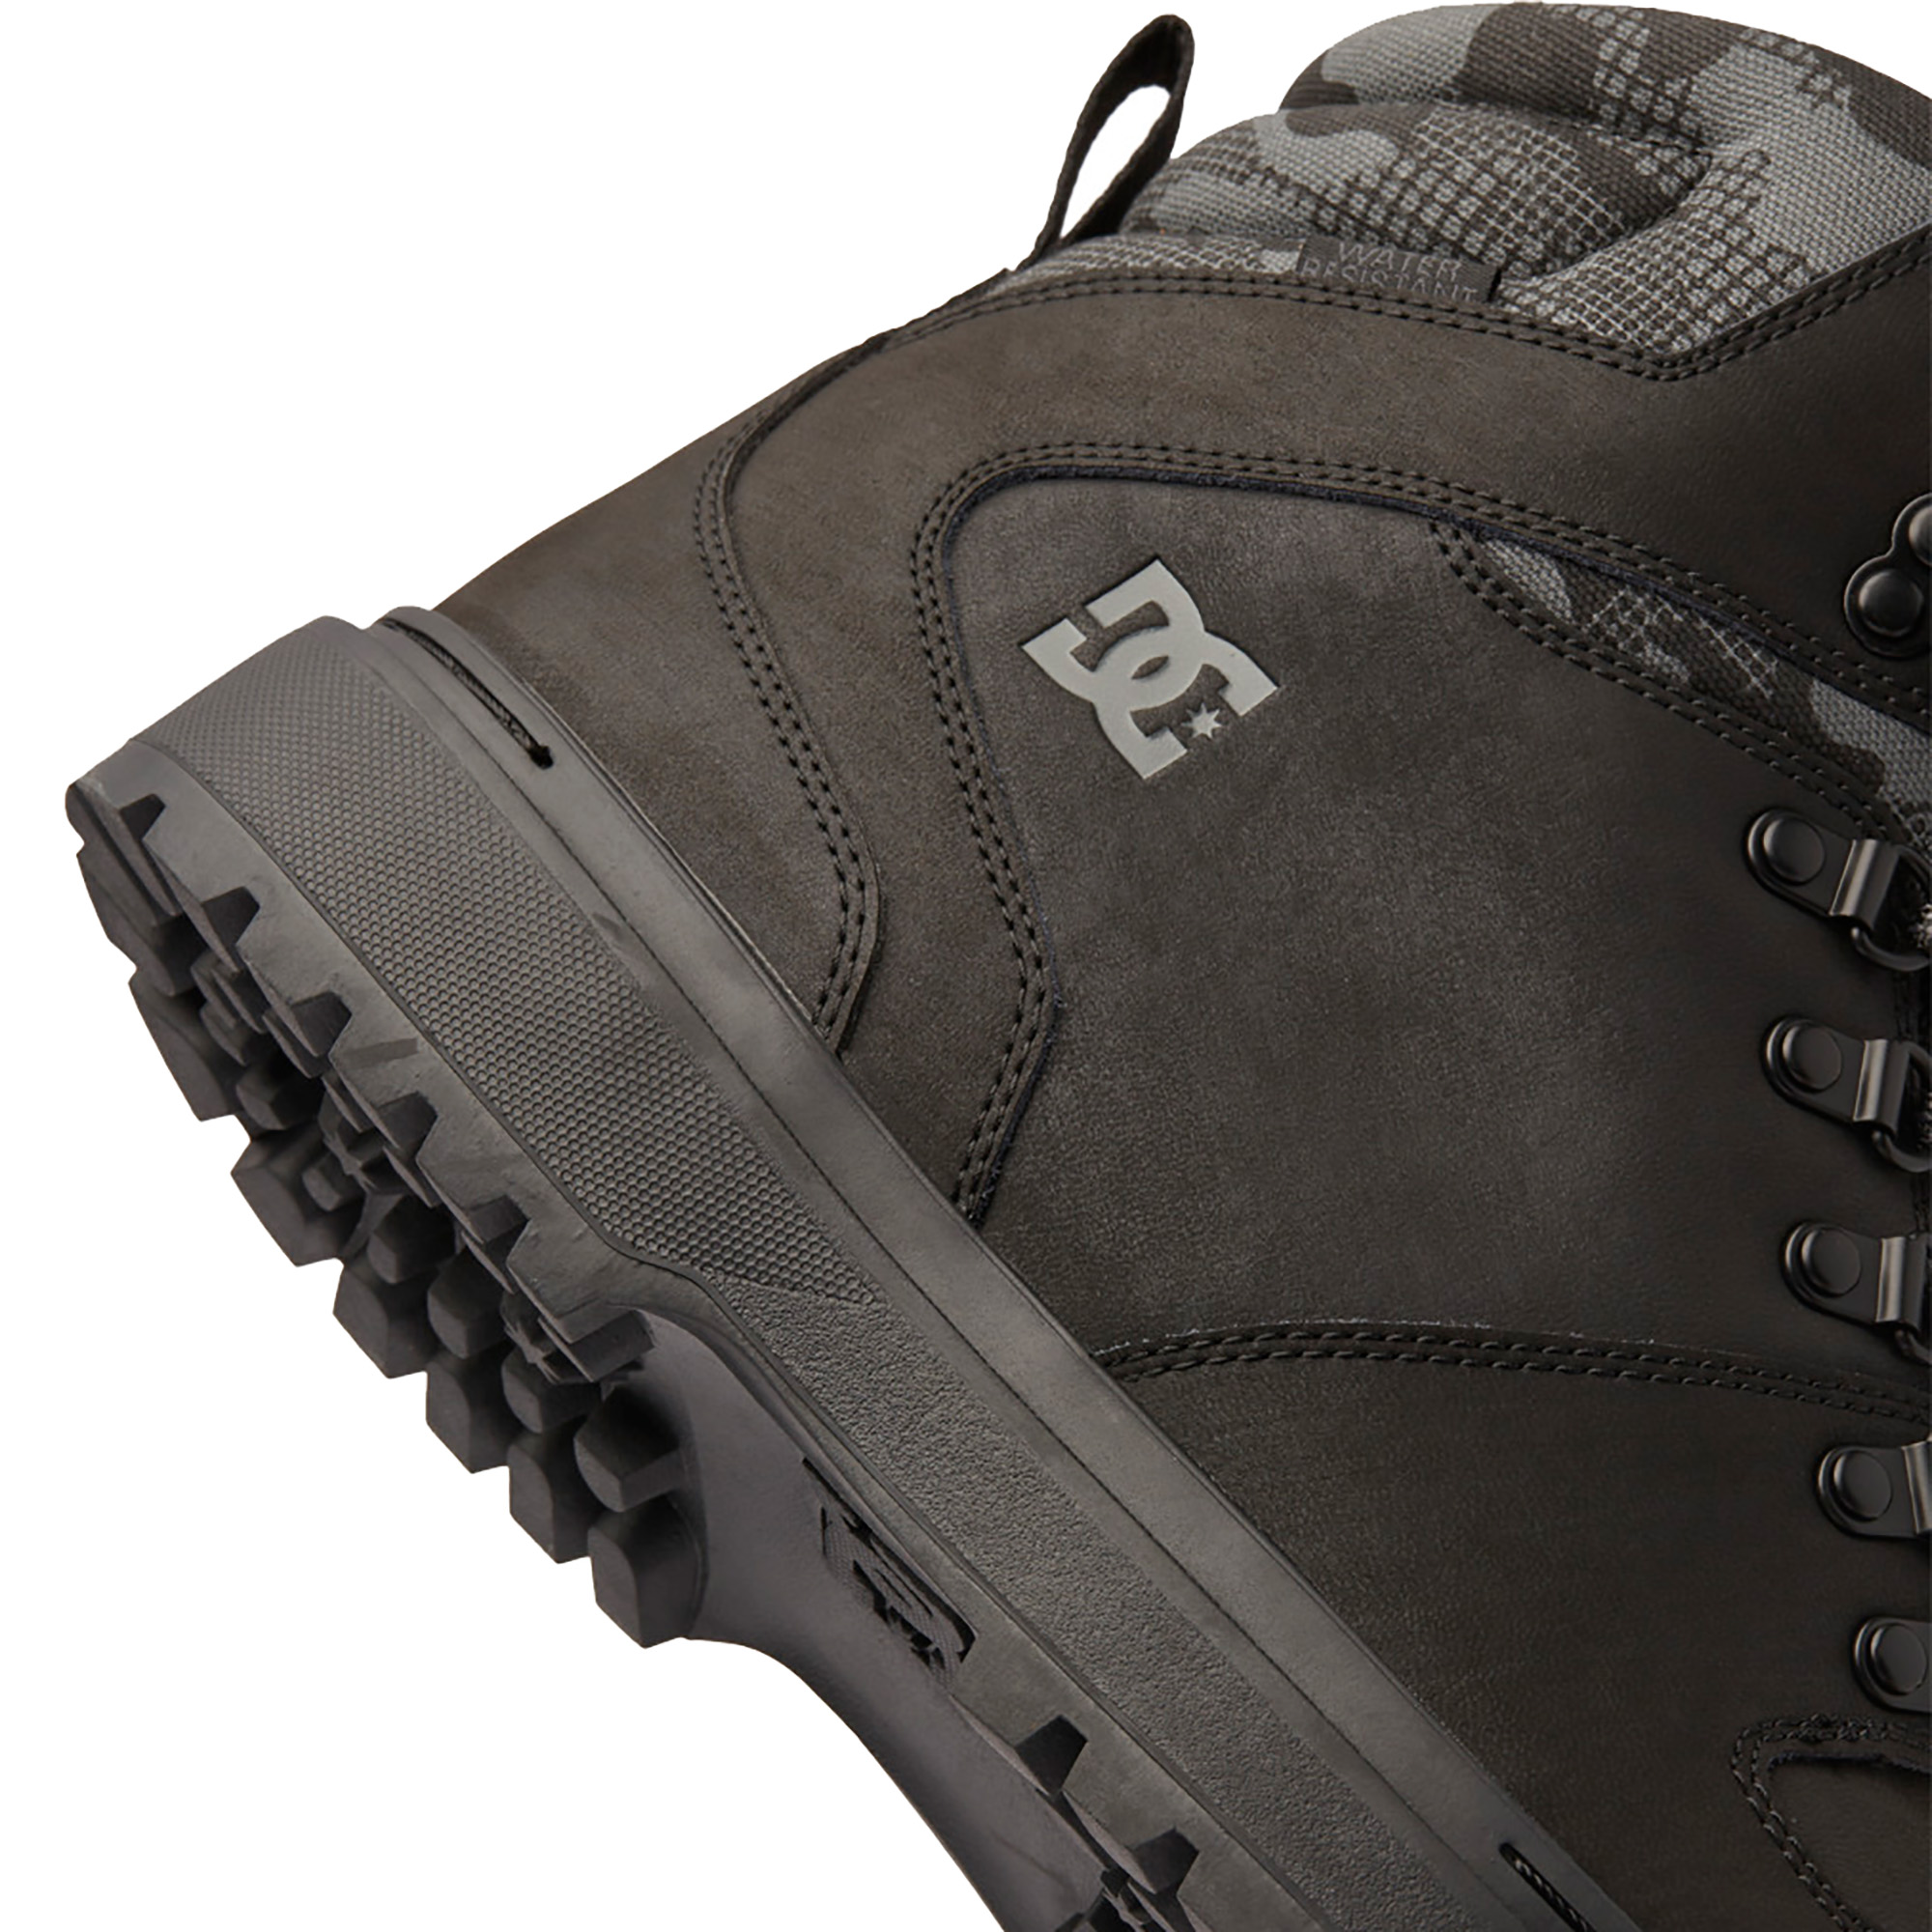 DC Peary Men's Winter Boots